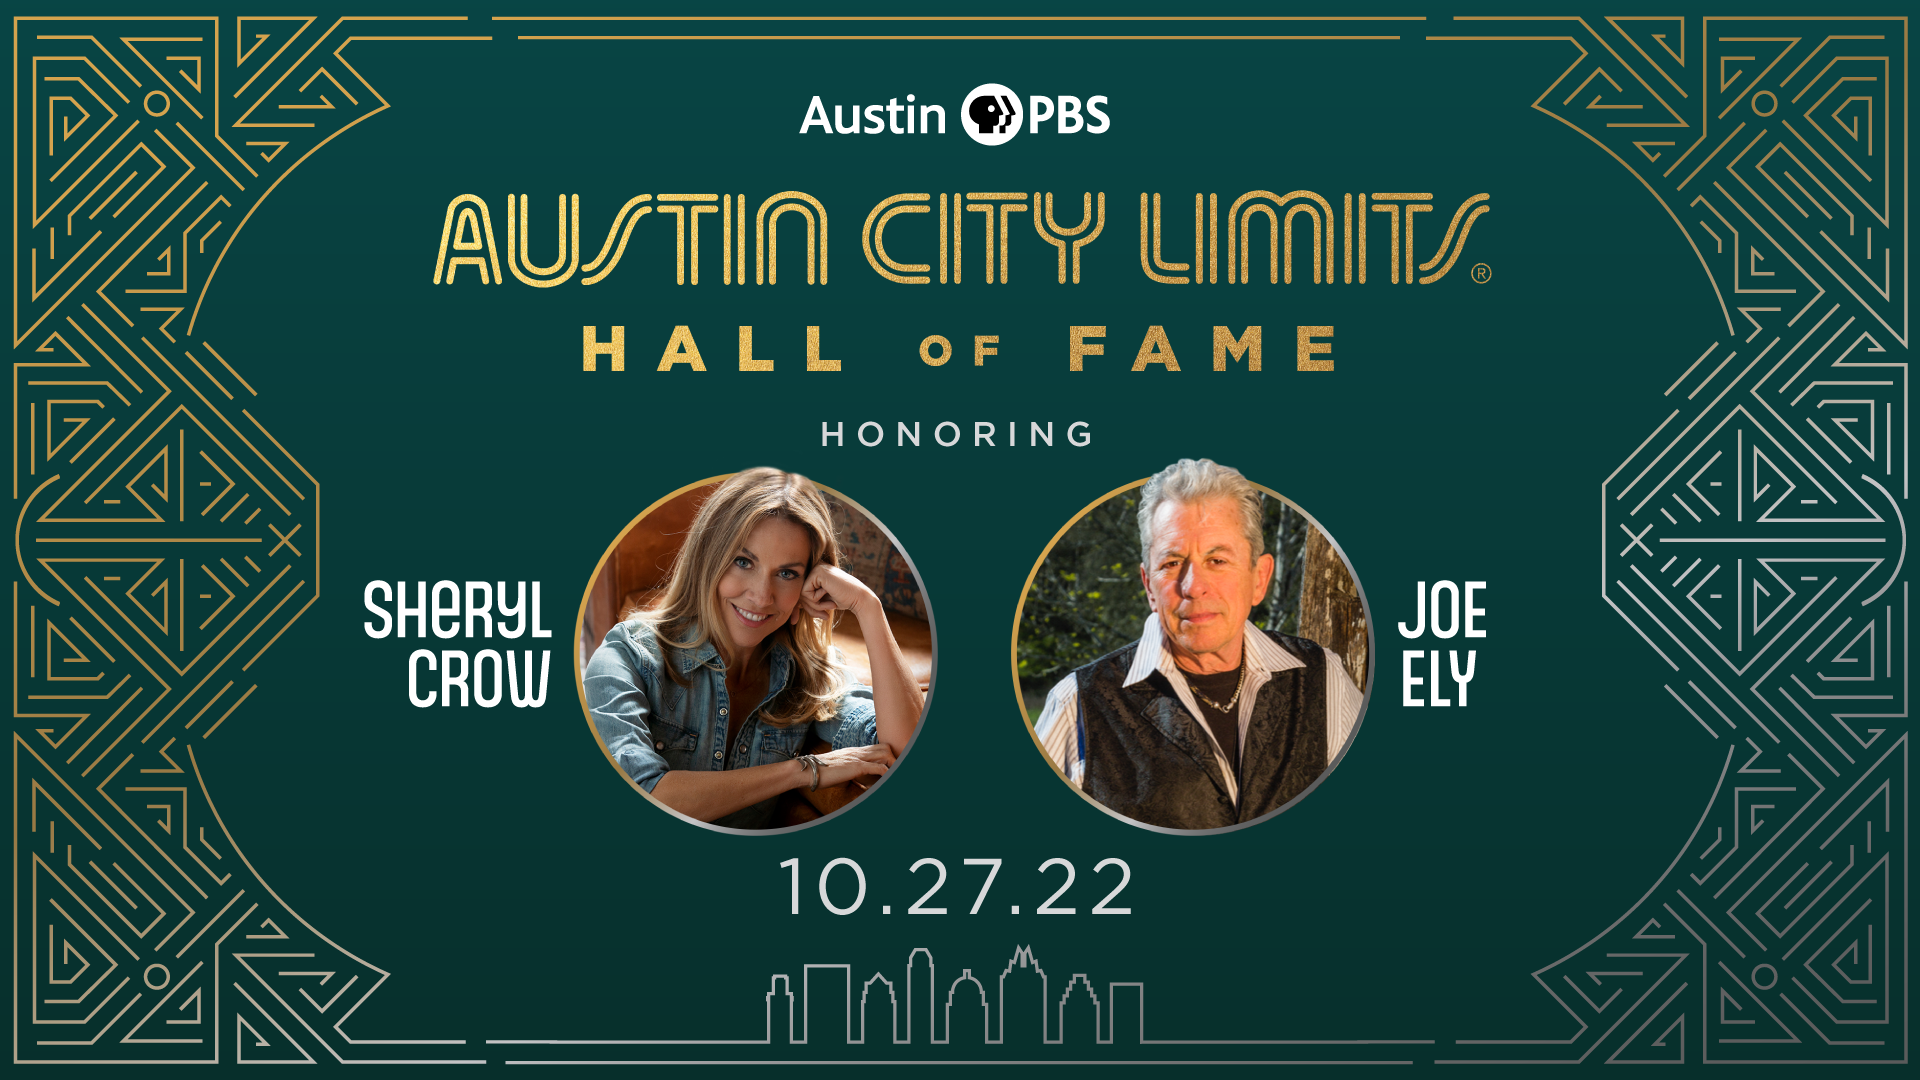 The 8th annual Austin City Limits Hall of Fame Induction and Celebration will take place October 27 honoring beloved singer, songwriter and superstar Sheryl Crow and iconic Texas music pioneer Joe Ely. An all-star lineup will salute the honorees and sponsorship opportunities are still available - don’t miss your chance to be part of this special night!
